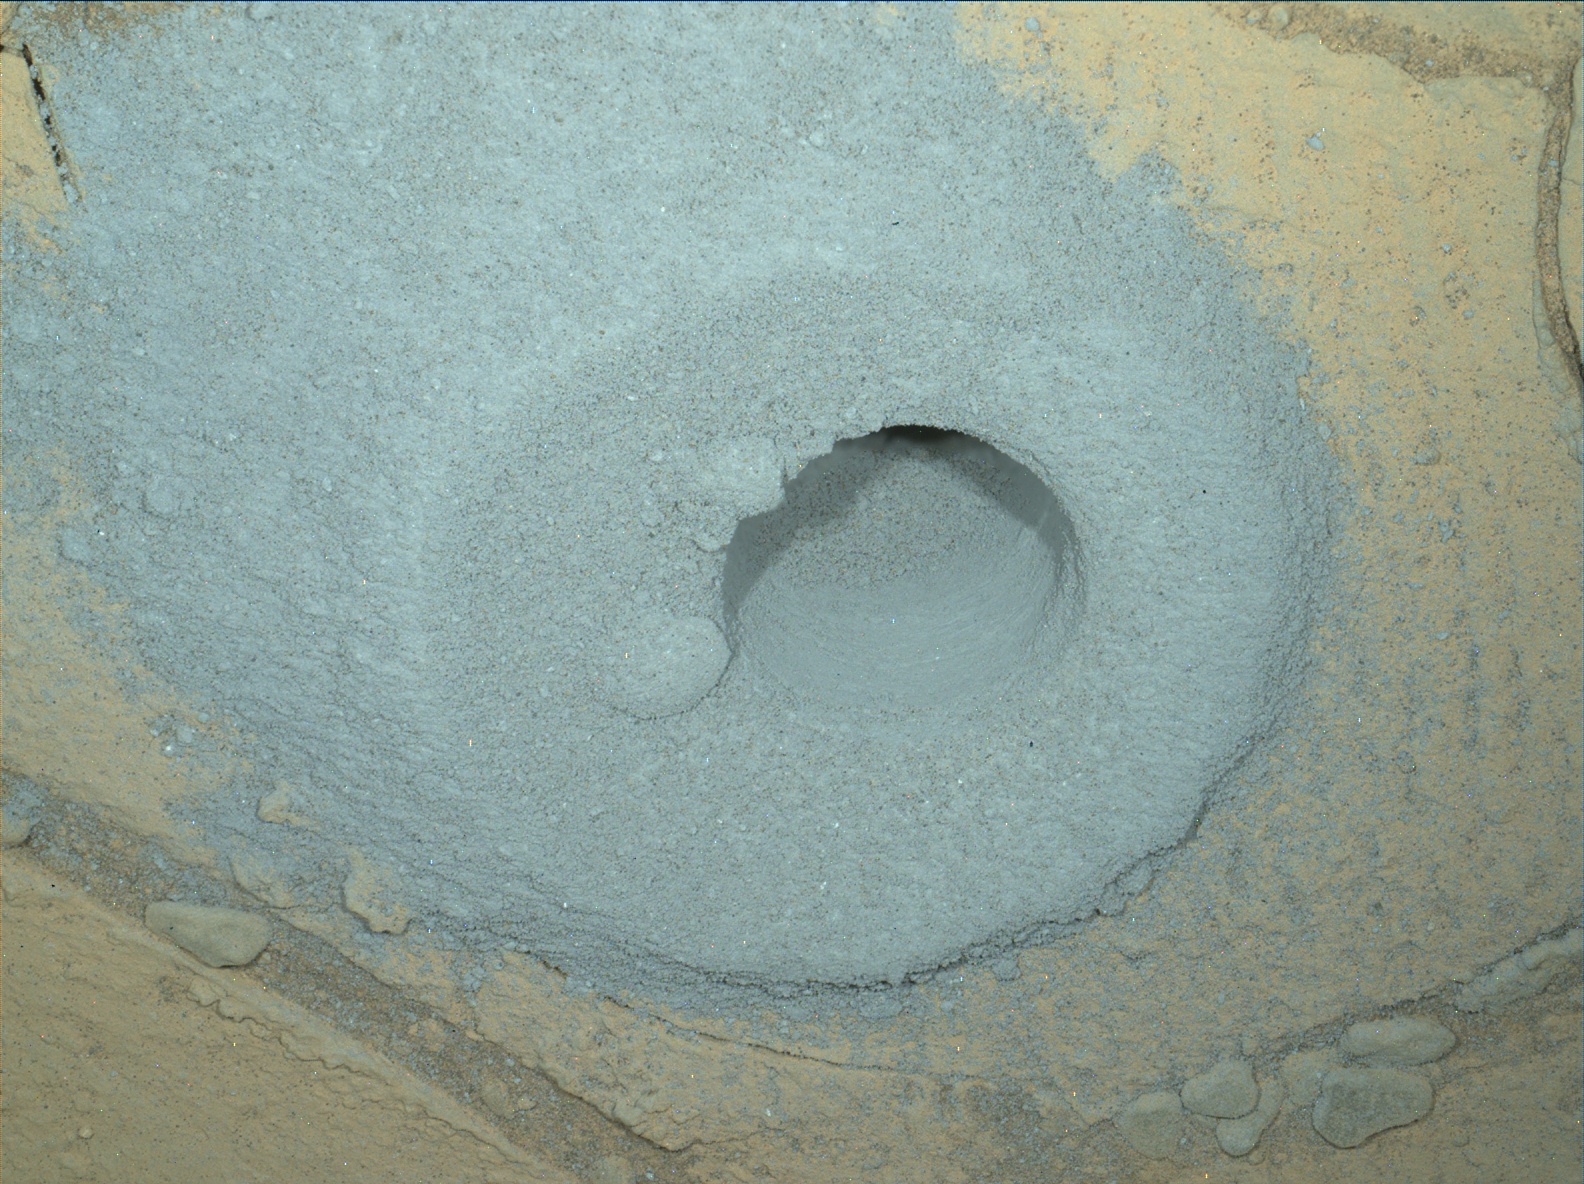 Nasa's Mars rover Curiosity acquired this image using its Mars Hand Lens Imager (MAHLI) on Sol 911